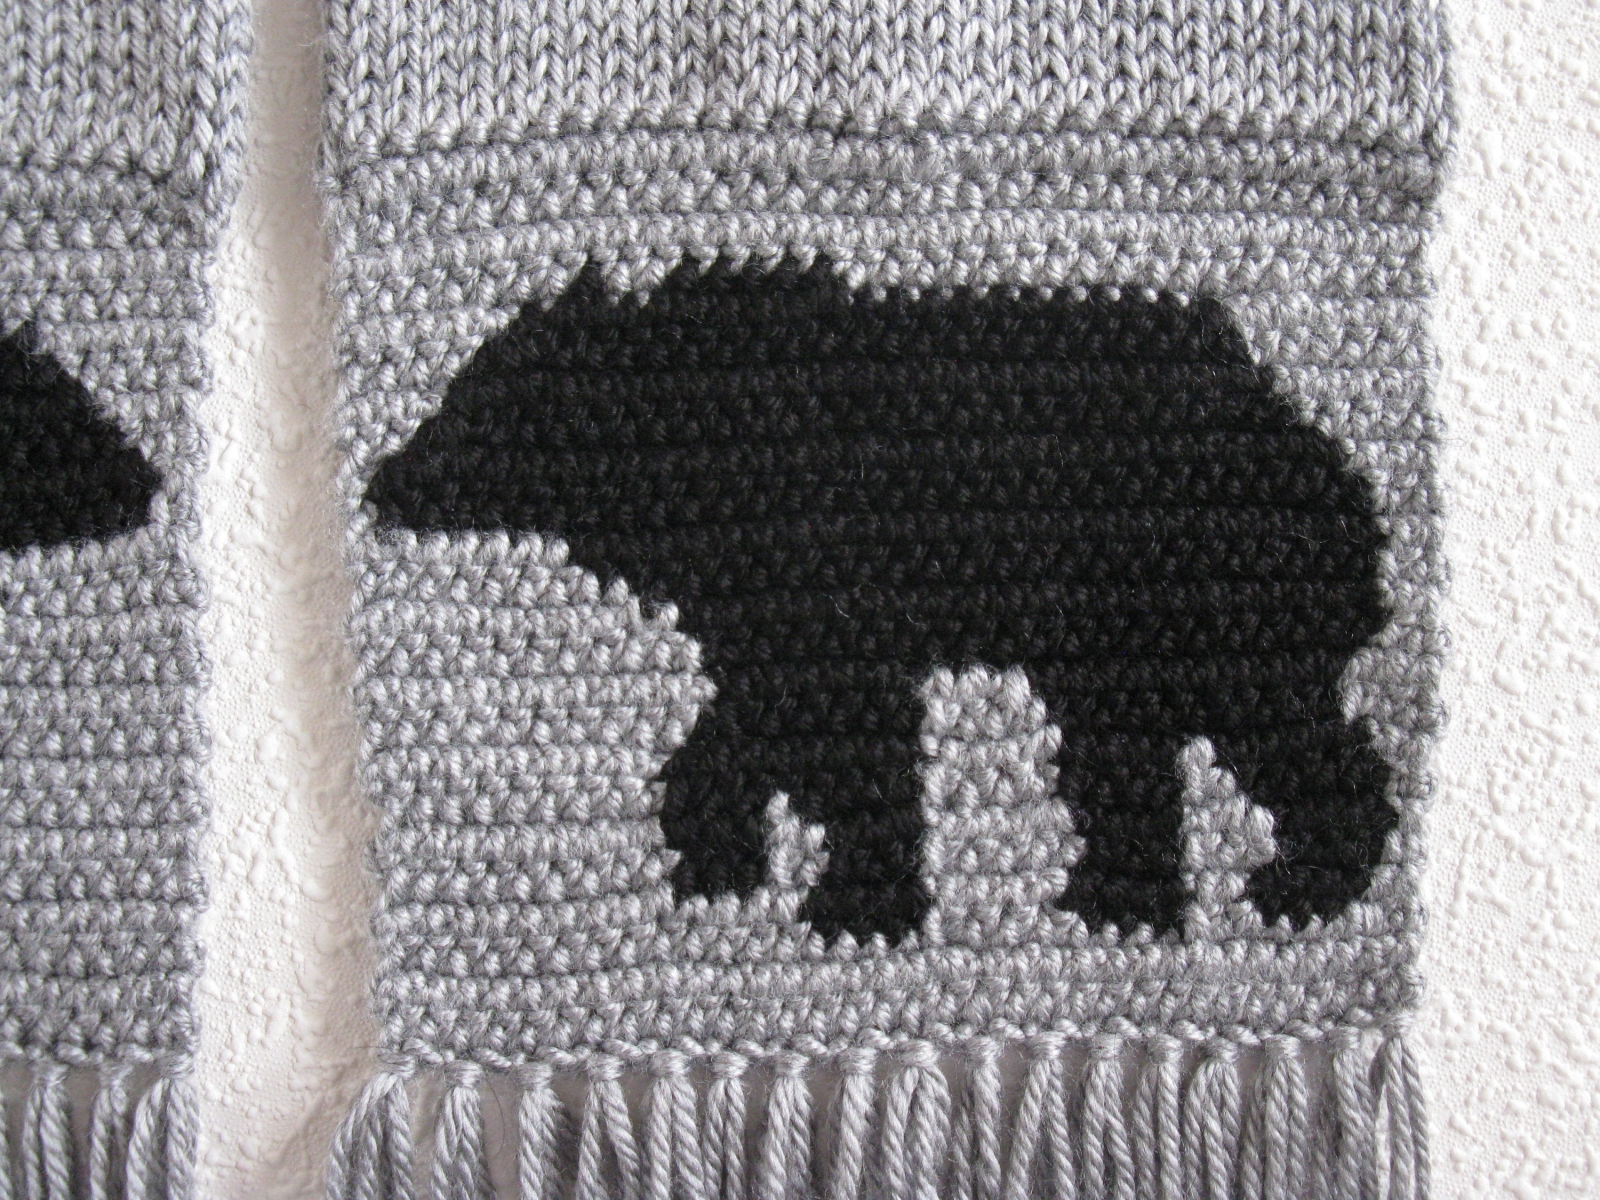 Knit Bear Scarf. Long, gray knitted and crochet scarf with